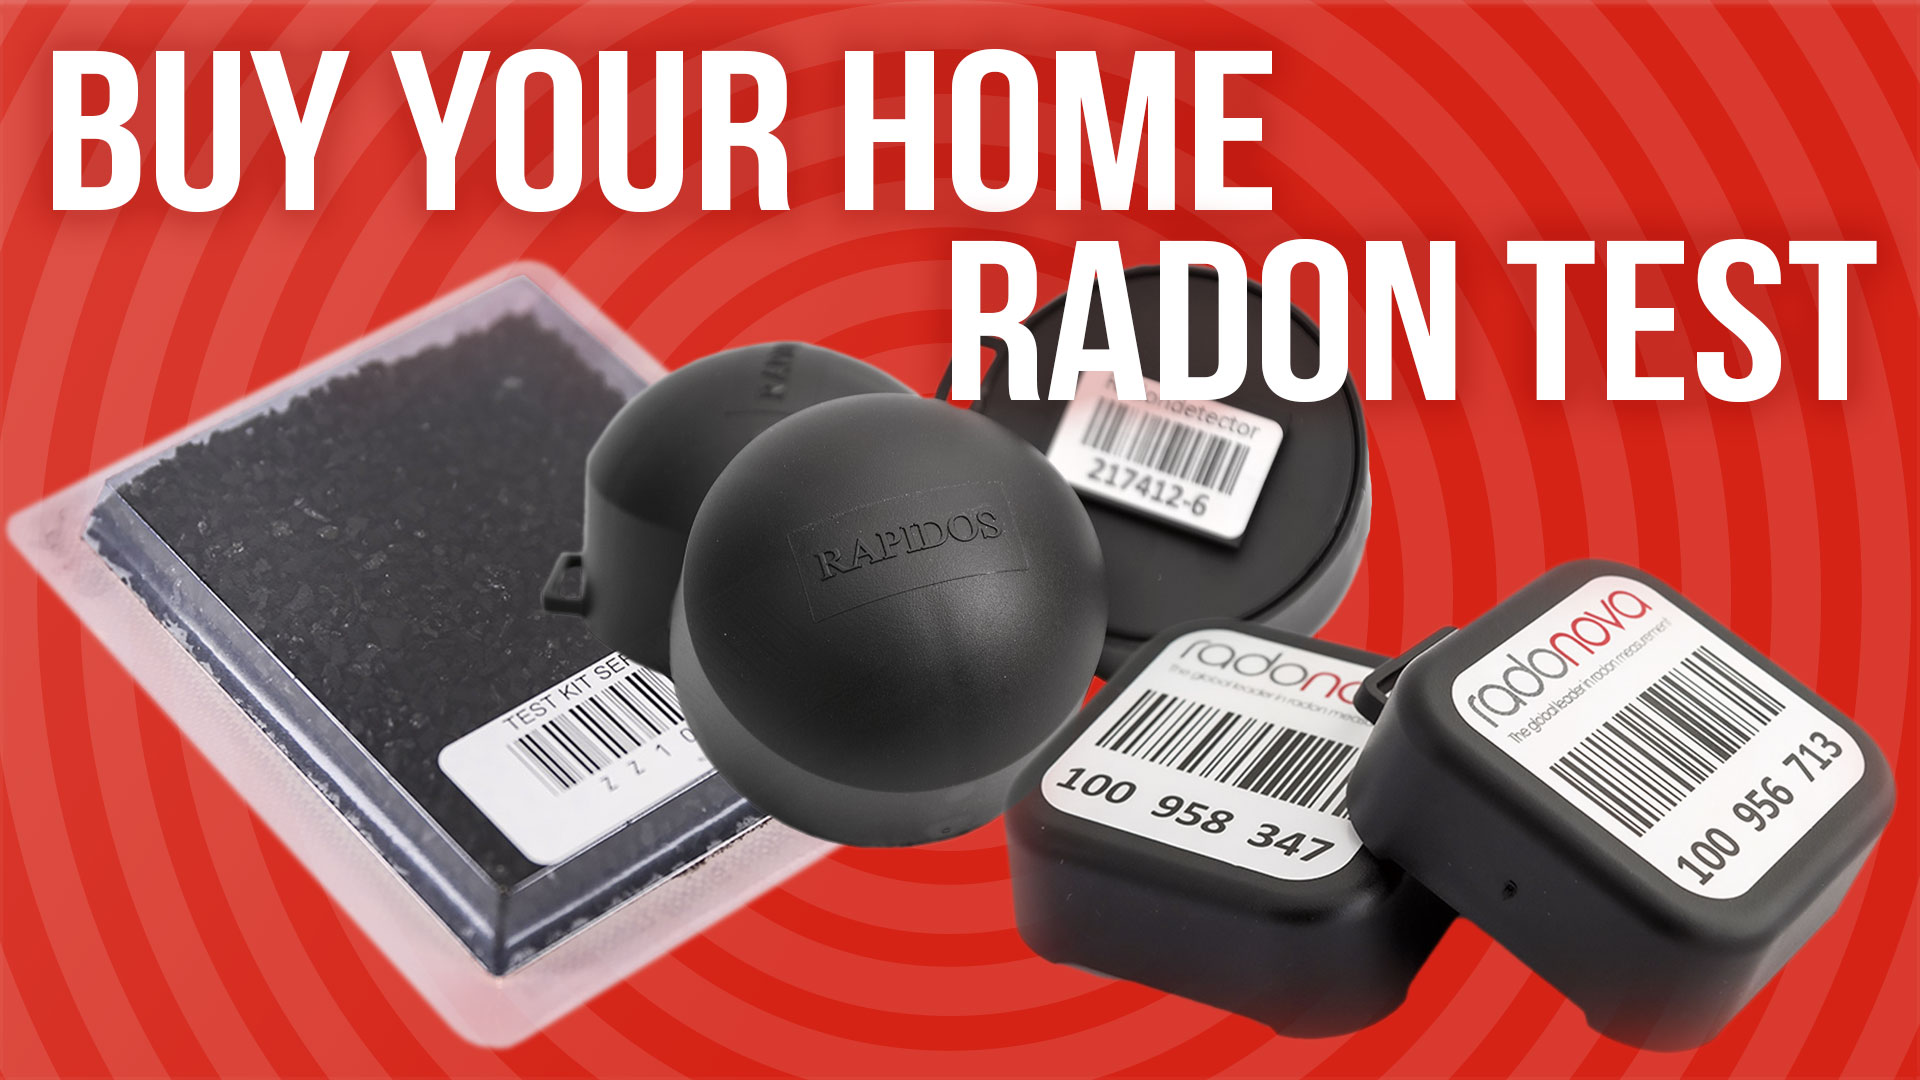 Radon Detector for Home, Fast and Accurate Radon Tester for Short and Long  Term Monitoring of Radon Levels in The Air, for Use in Homes, Schools,  Offices, Basements.Easy to Carry, with Hidden